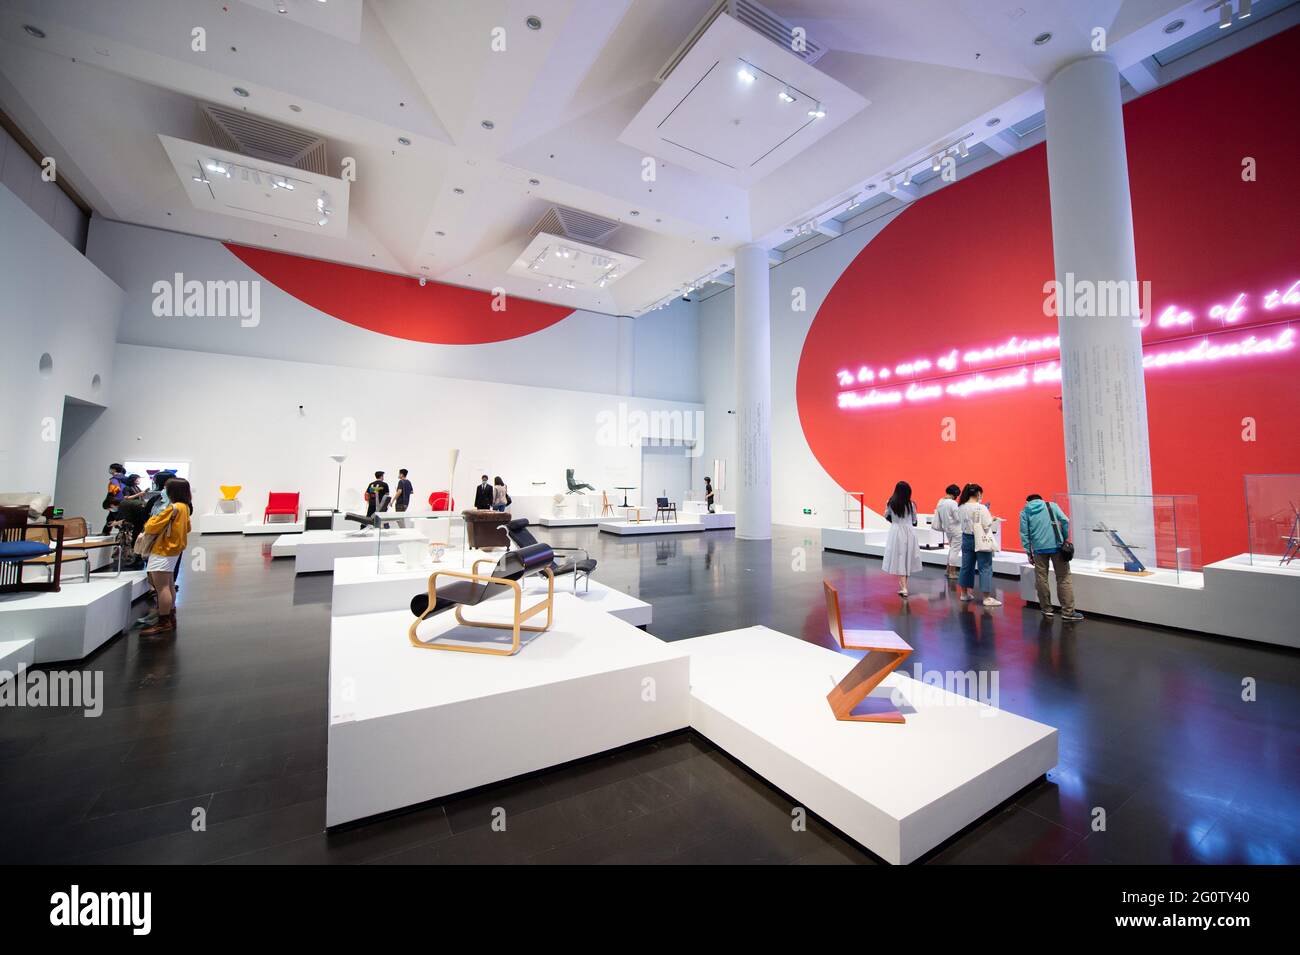 Beijing, China. 3rd June, 2021. People visit an exhibition in Tsinghua University Art Museum in Beijing, capital of China, June 3, 2021. Displaying a total of 158 modern designs, the exhibition named '100 Years of Design History: The Biagetti-Koenig Collection' is held in Tsinghua University Art Museum. The exhibition will last until August 25. Credit: Chen Zhonghao/Xinhua/Alamy Live News Stock Photo